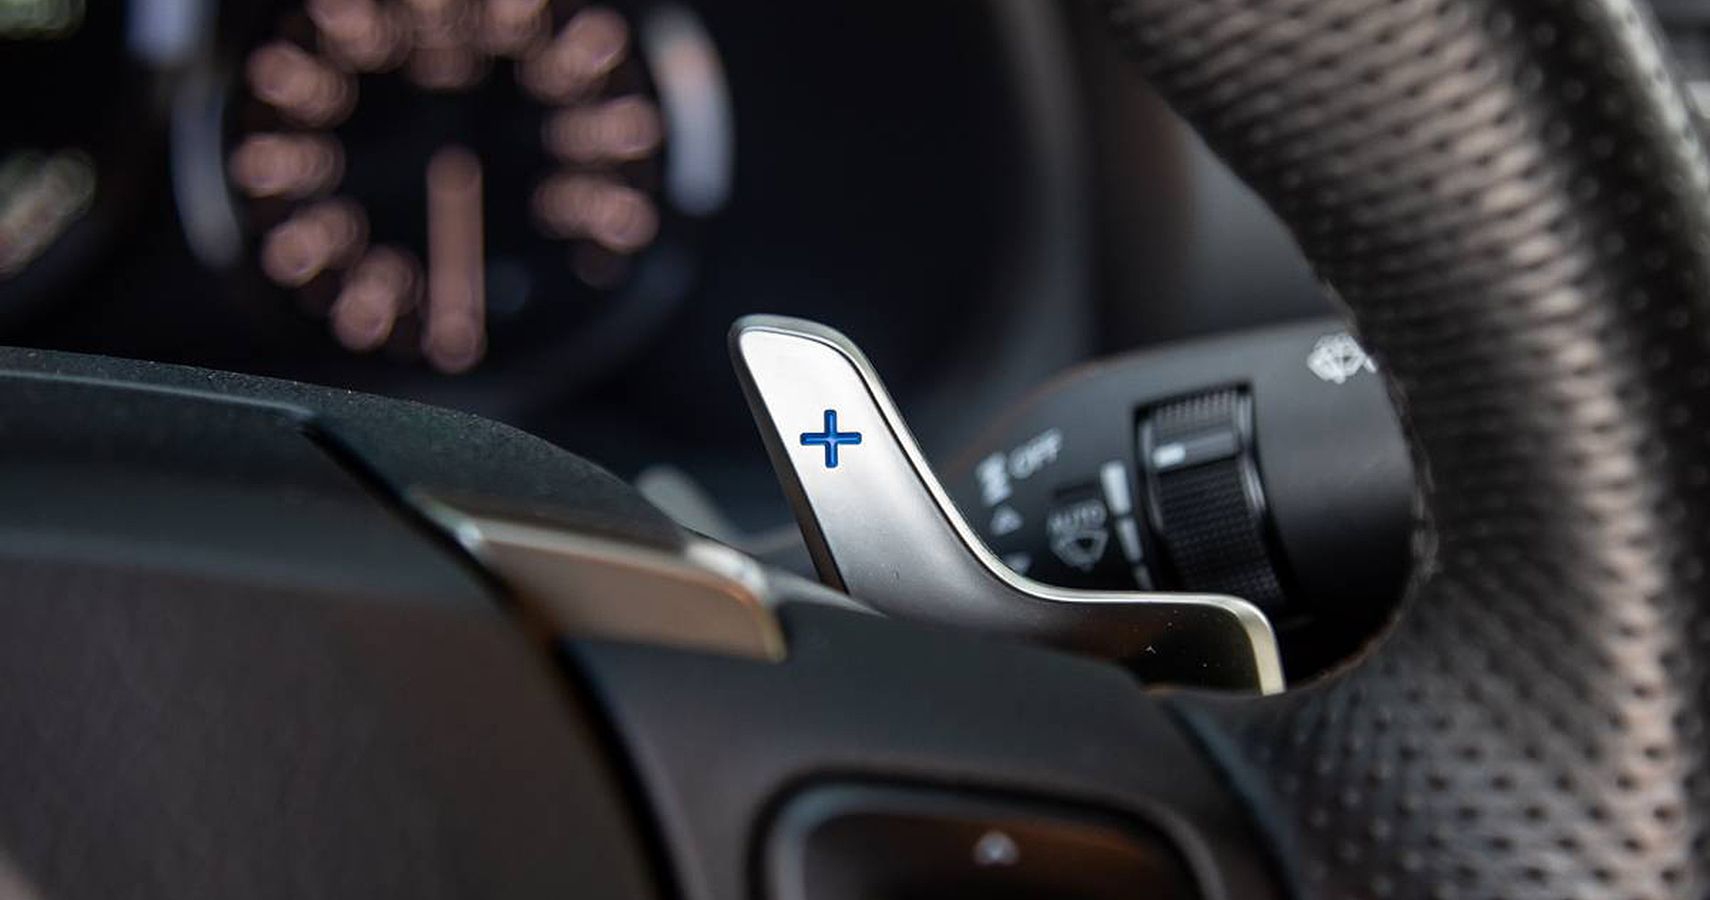 A Small Paddle-Like Protuberance On The Back Of The Steering Wheel Called A Paddle Shifter Is What Helps A Driver Have A Semblance Of Control